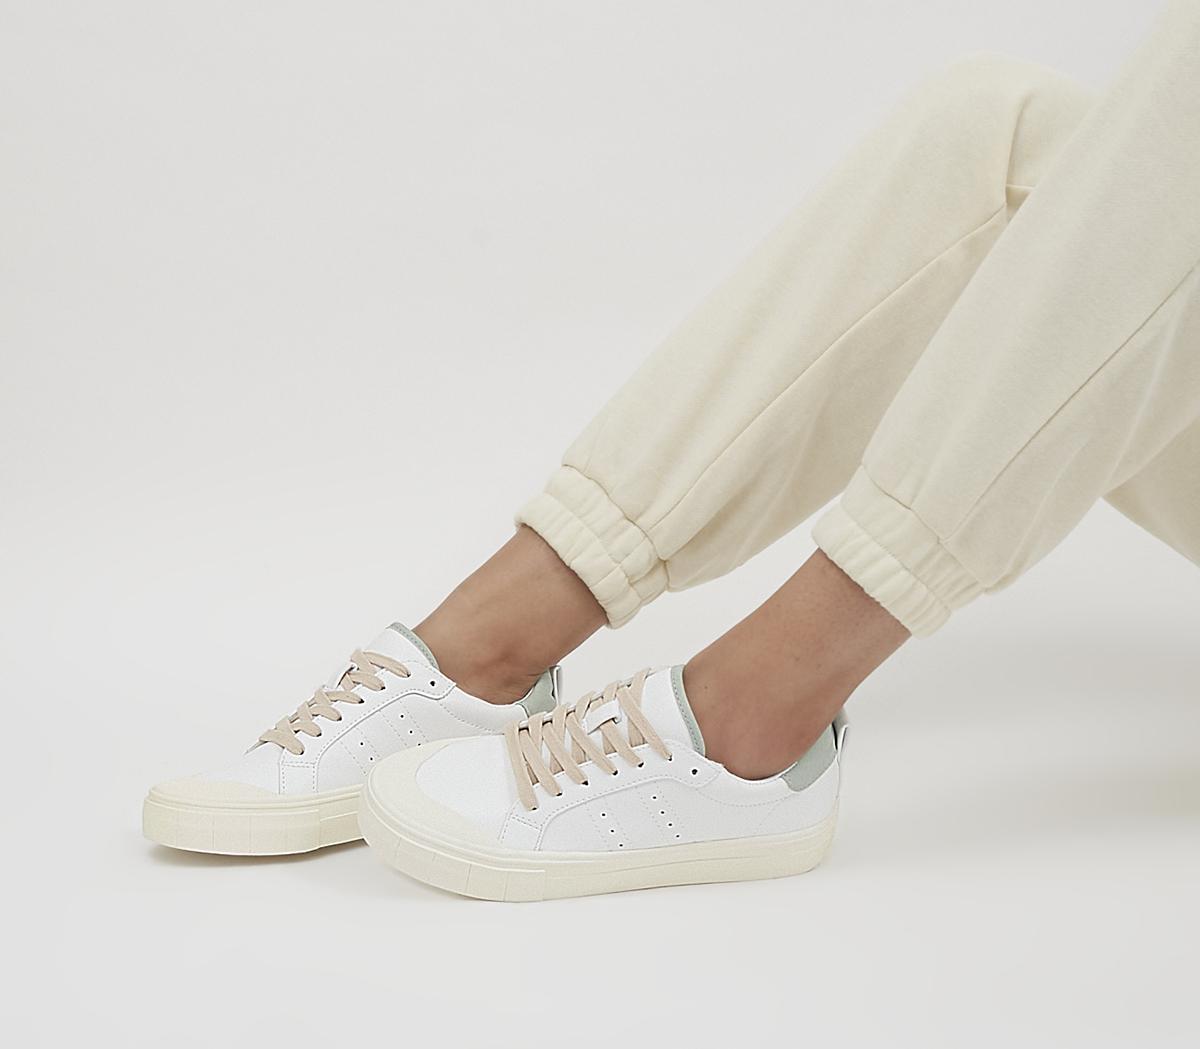 OfficeFloating Textured Sole Lace Up TrainersWhite Sage Mix